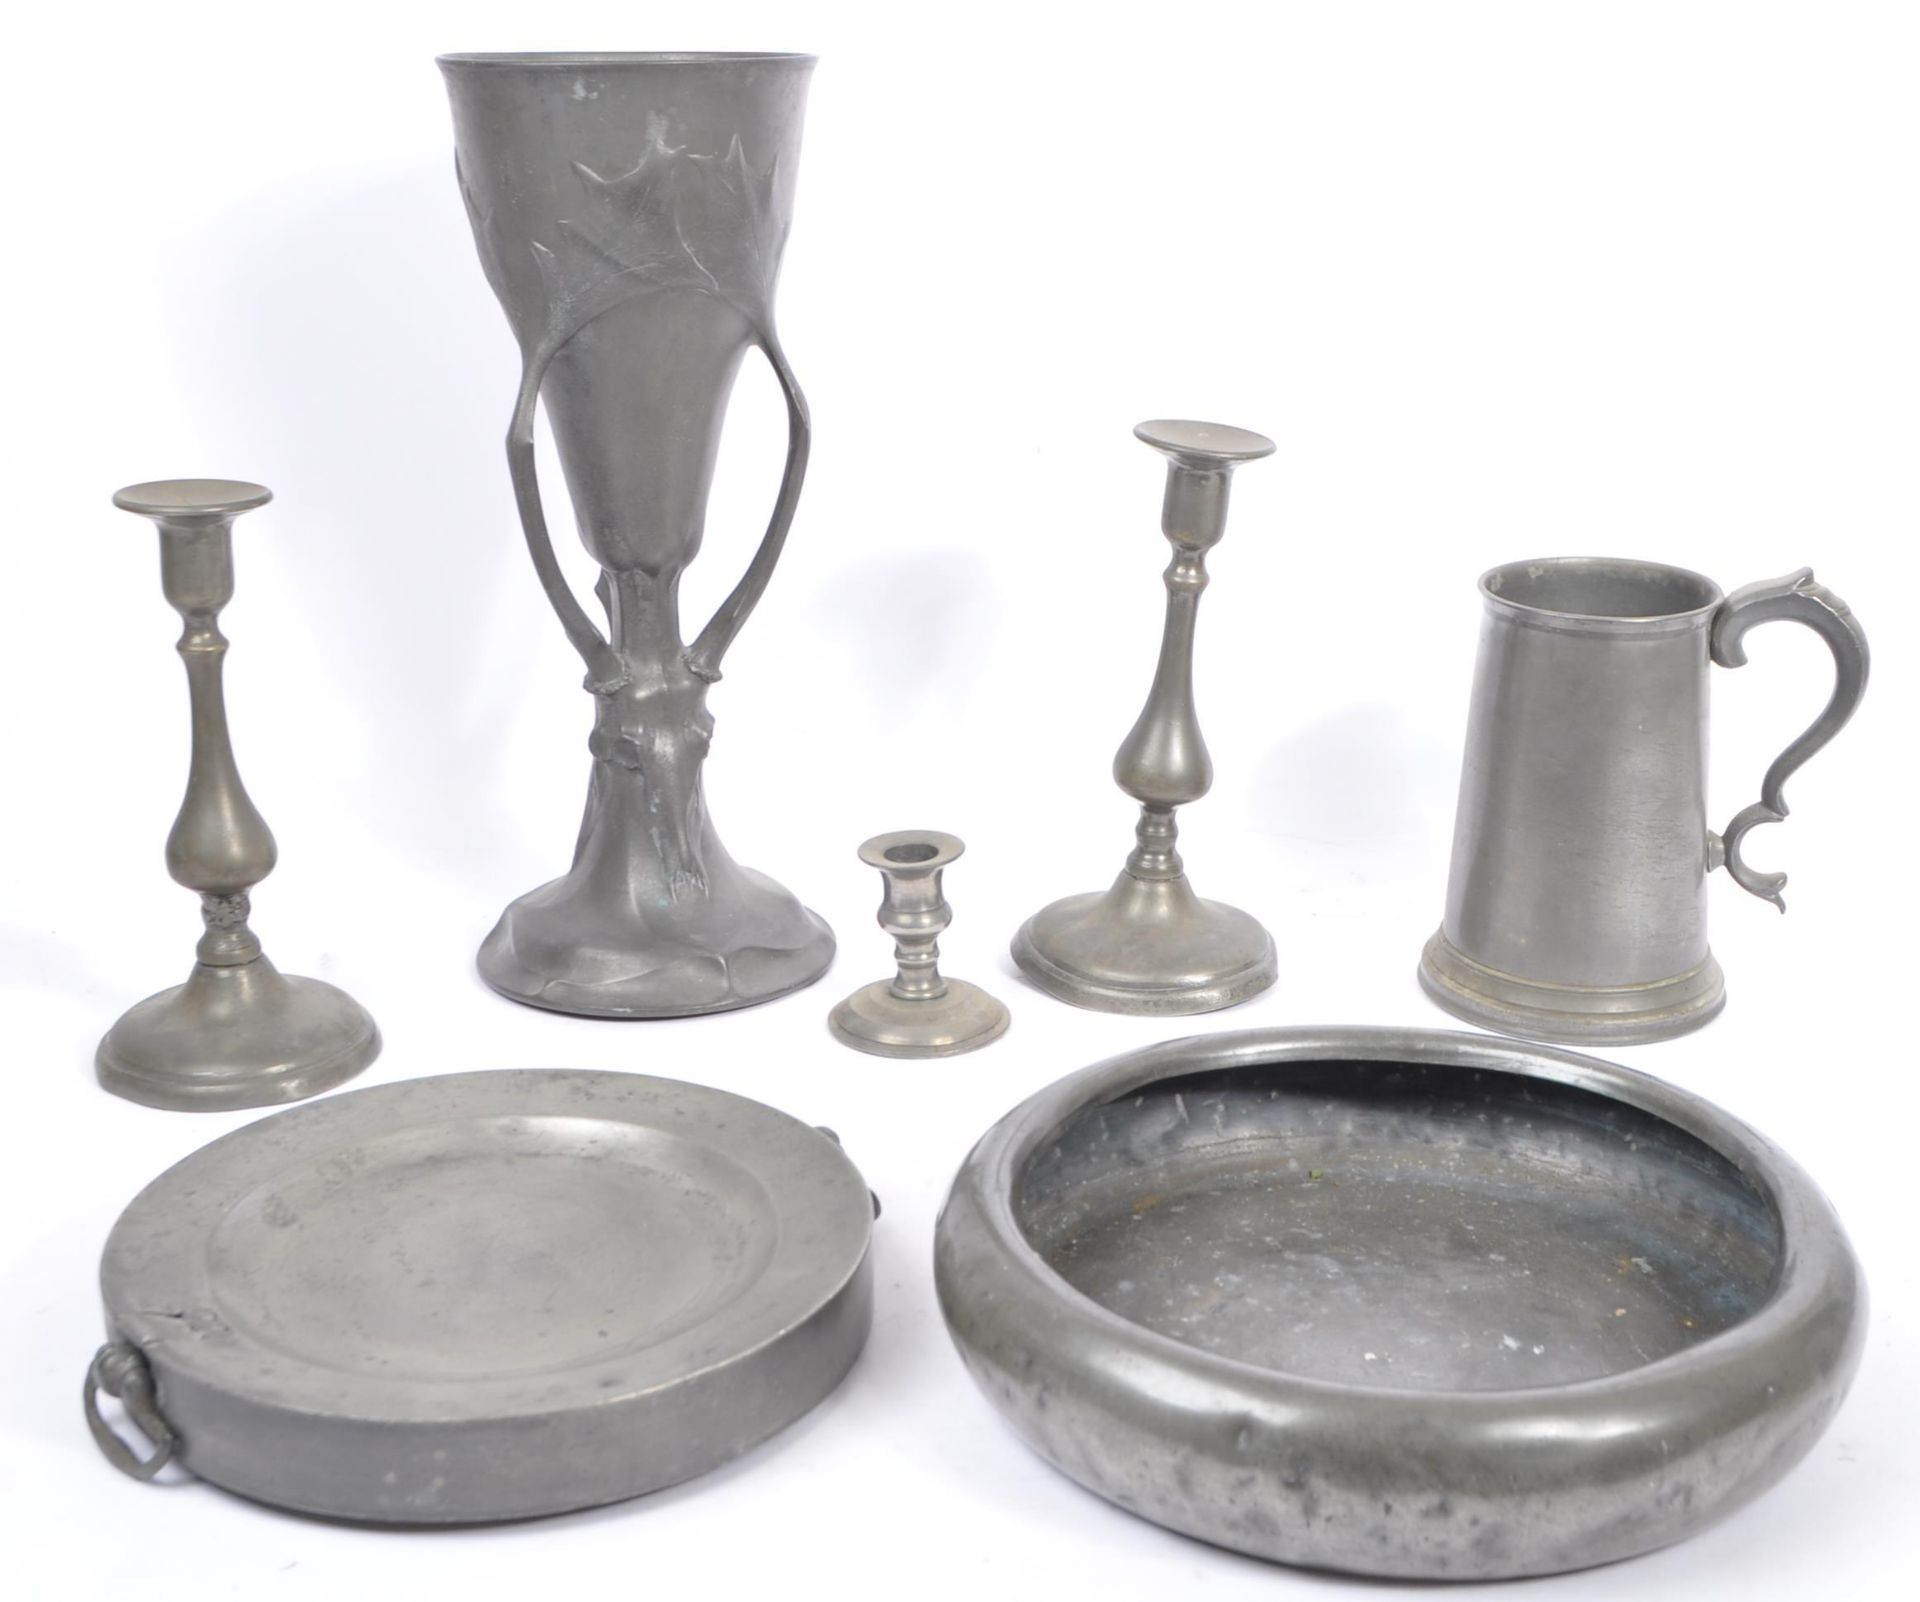 COLLECTION OF EARLY 20TH CENTURY METAL PEWTER EXAMPLES